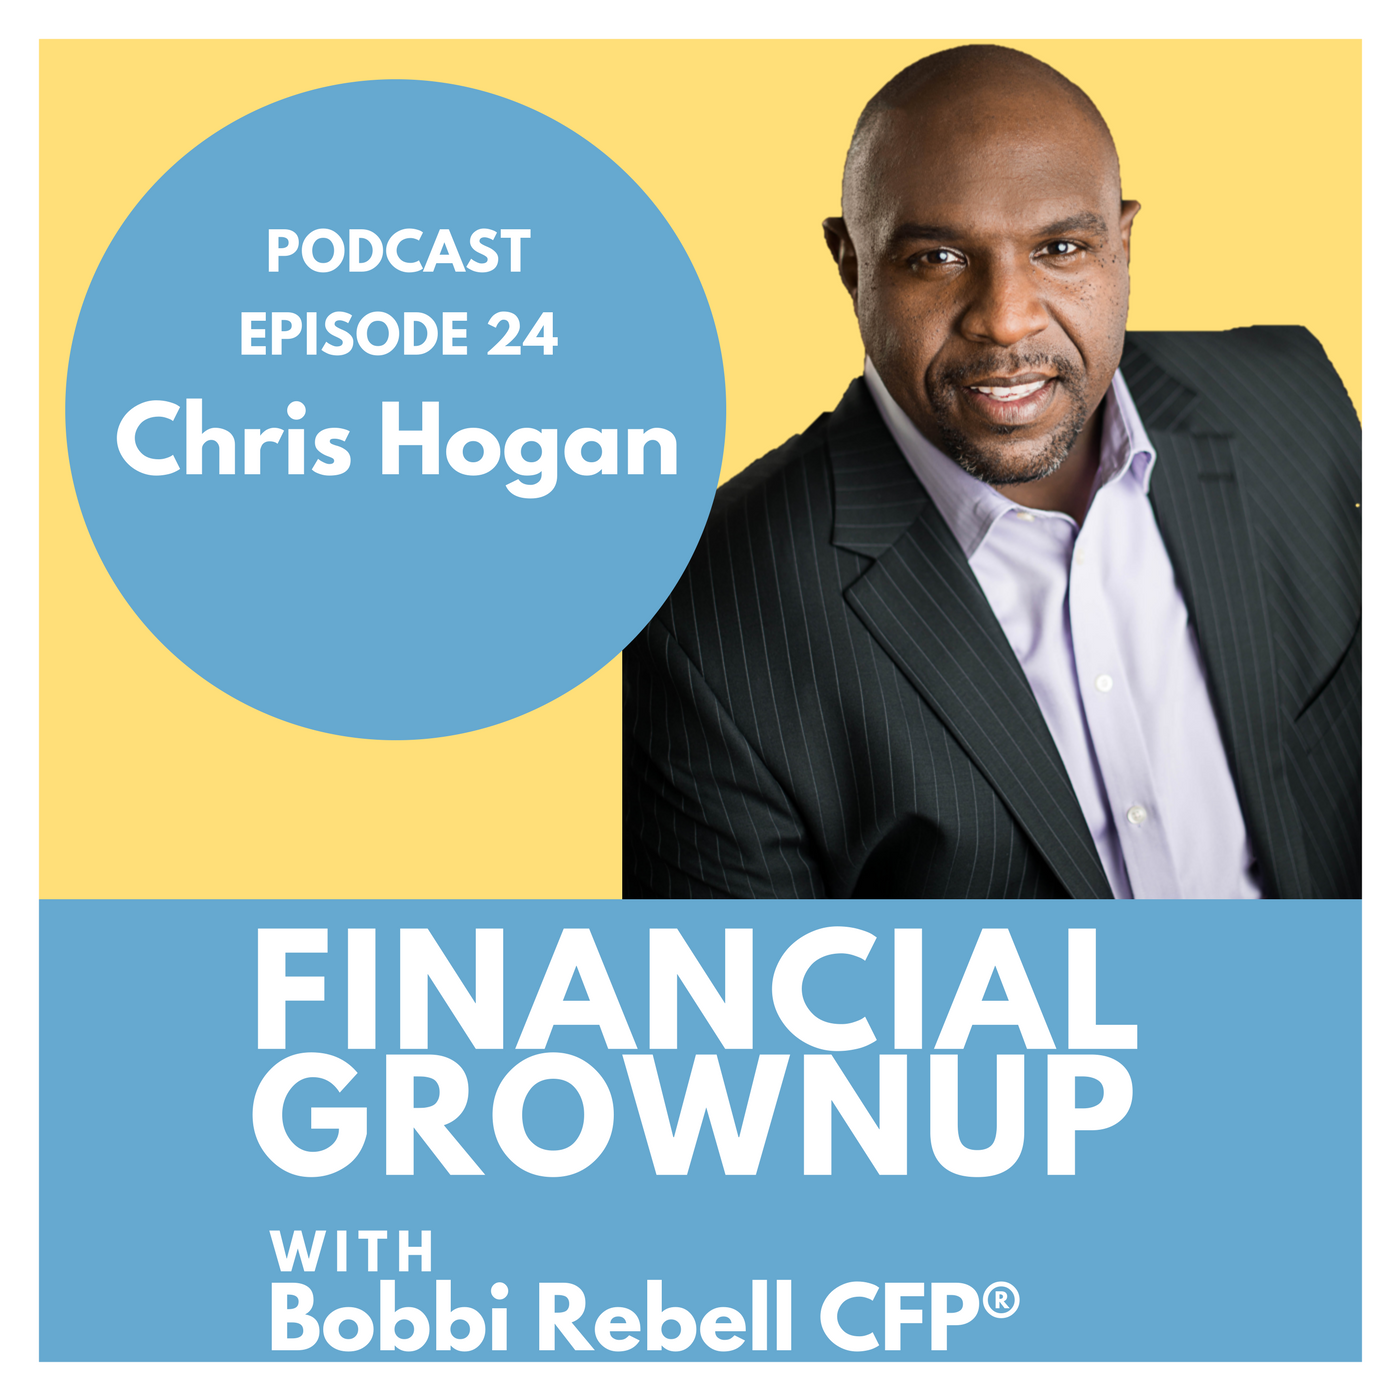 Chris Hogan chops the fat the grocery store- and cashes in Bobbi Rebell Financial Grownup Grownup Bobbi Rebell CFP®